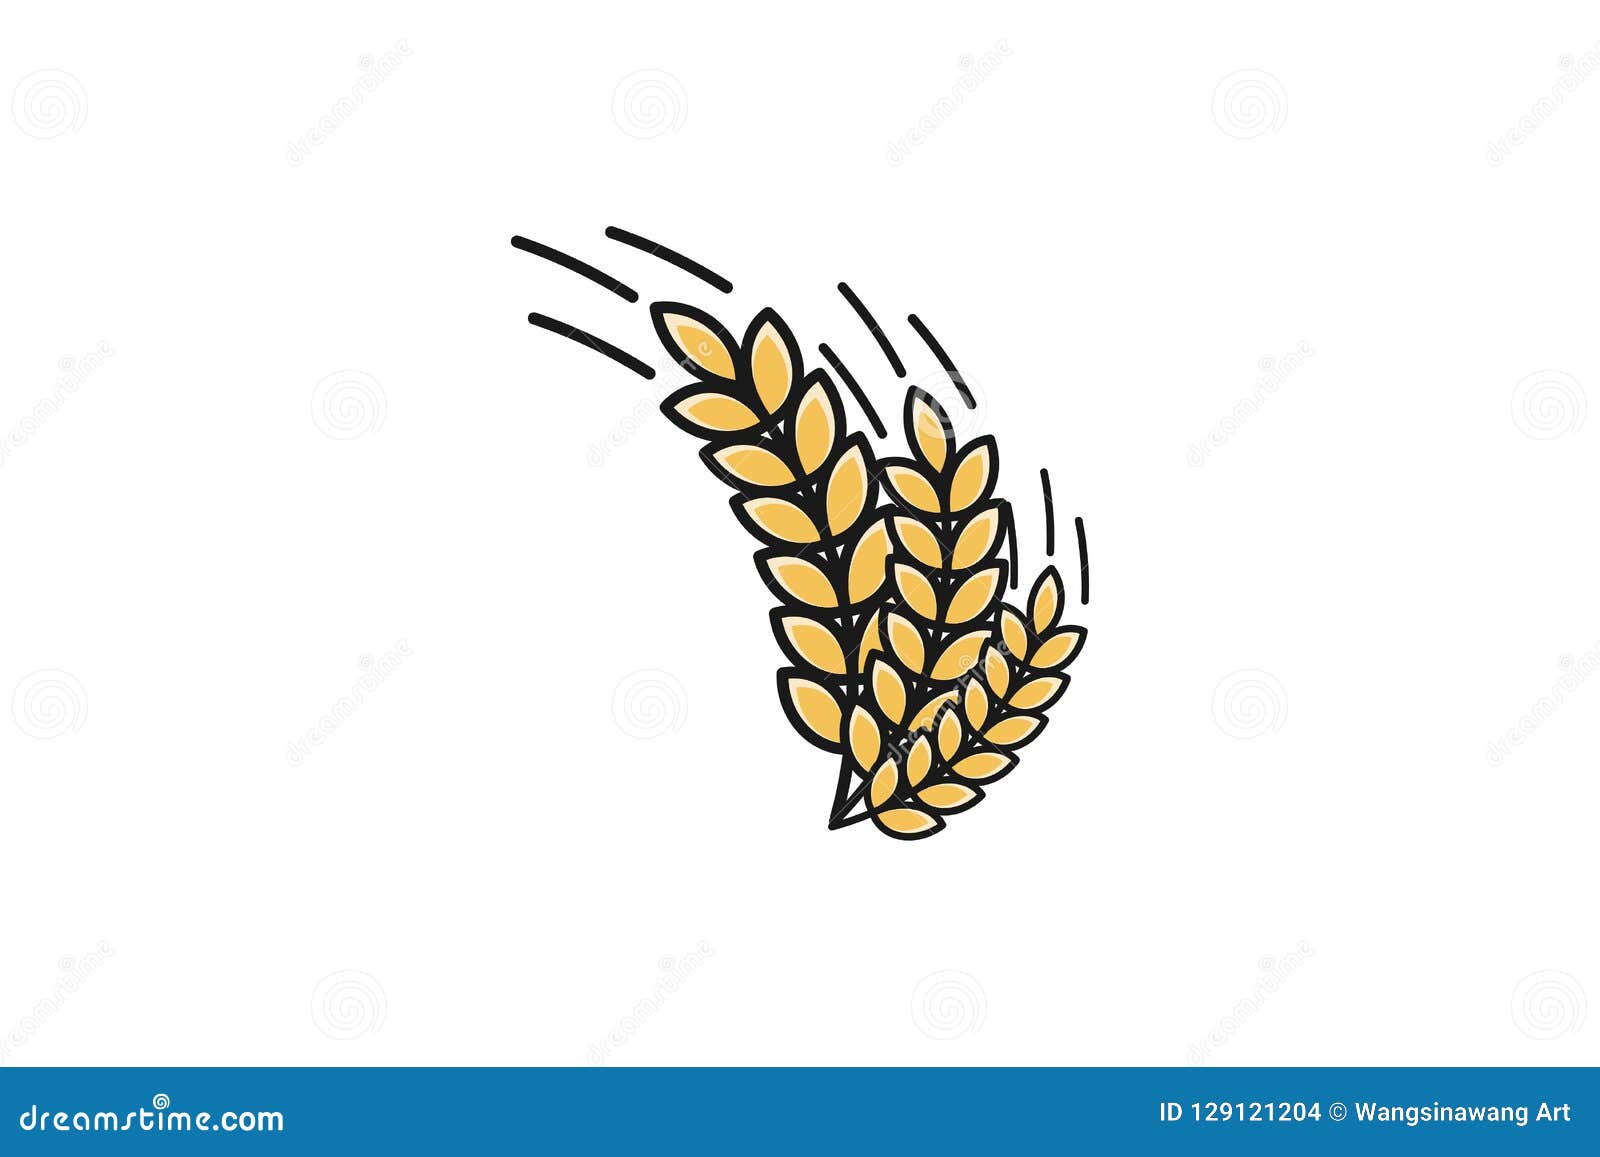 Wheat Grain Agriculture Logo Inspiration Isolated On White